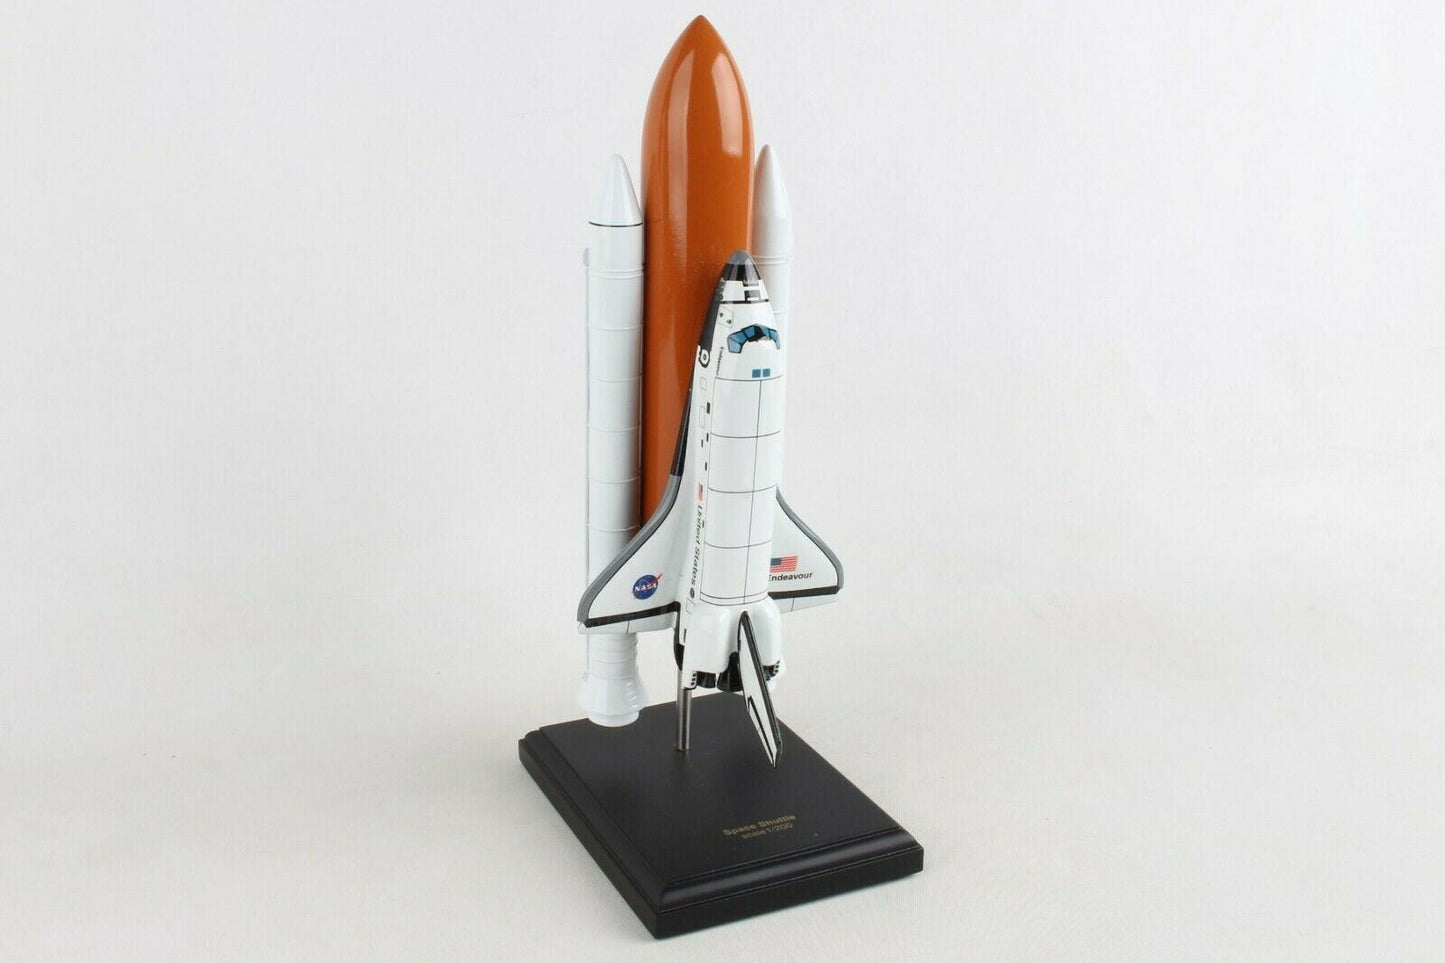 ALDO Hobbies & Creative Arts> Collectibles> Scale Model NASA Space Shuttle Endeavor Orbiter Full Stack 11 Inches Wood Model Space Craft